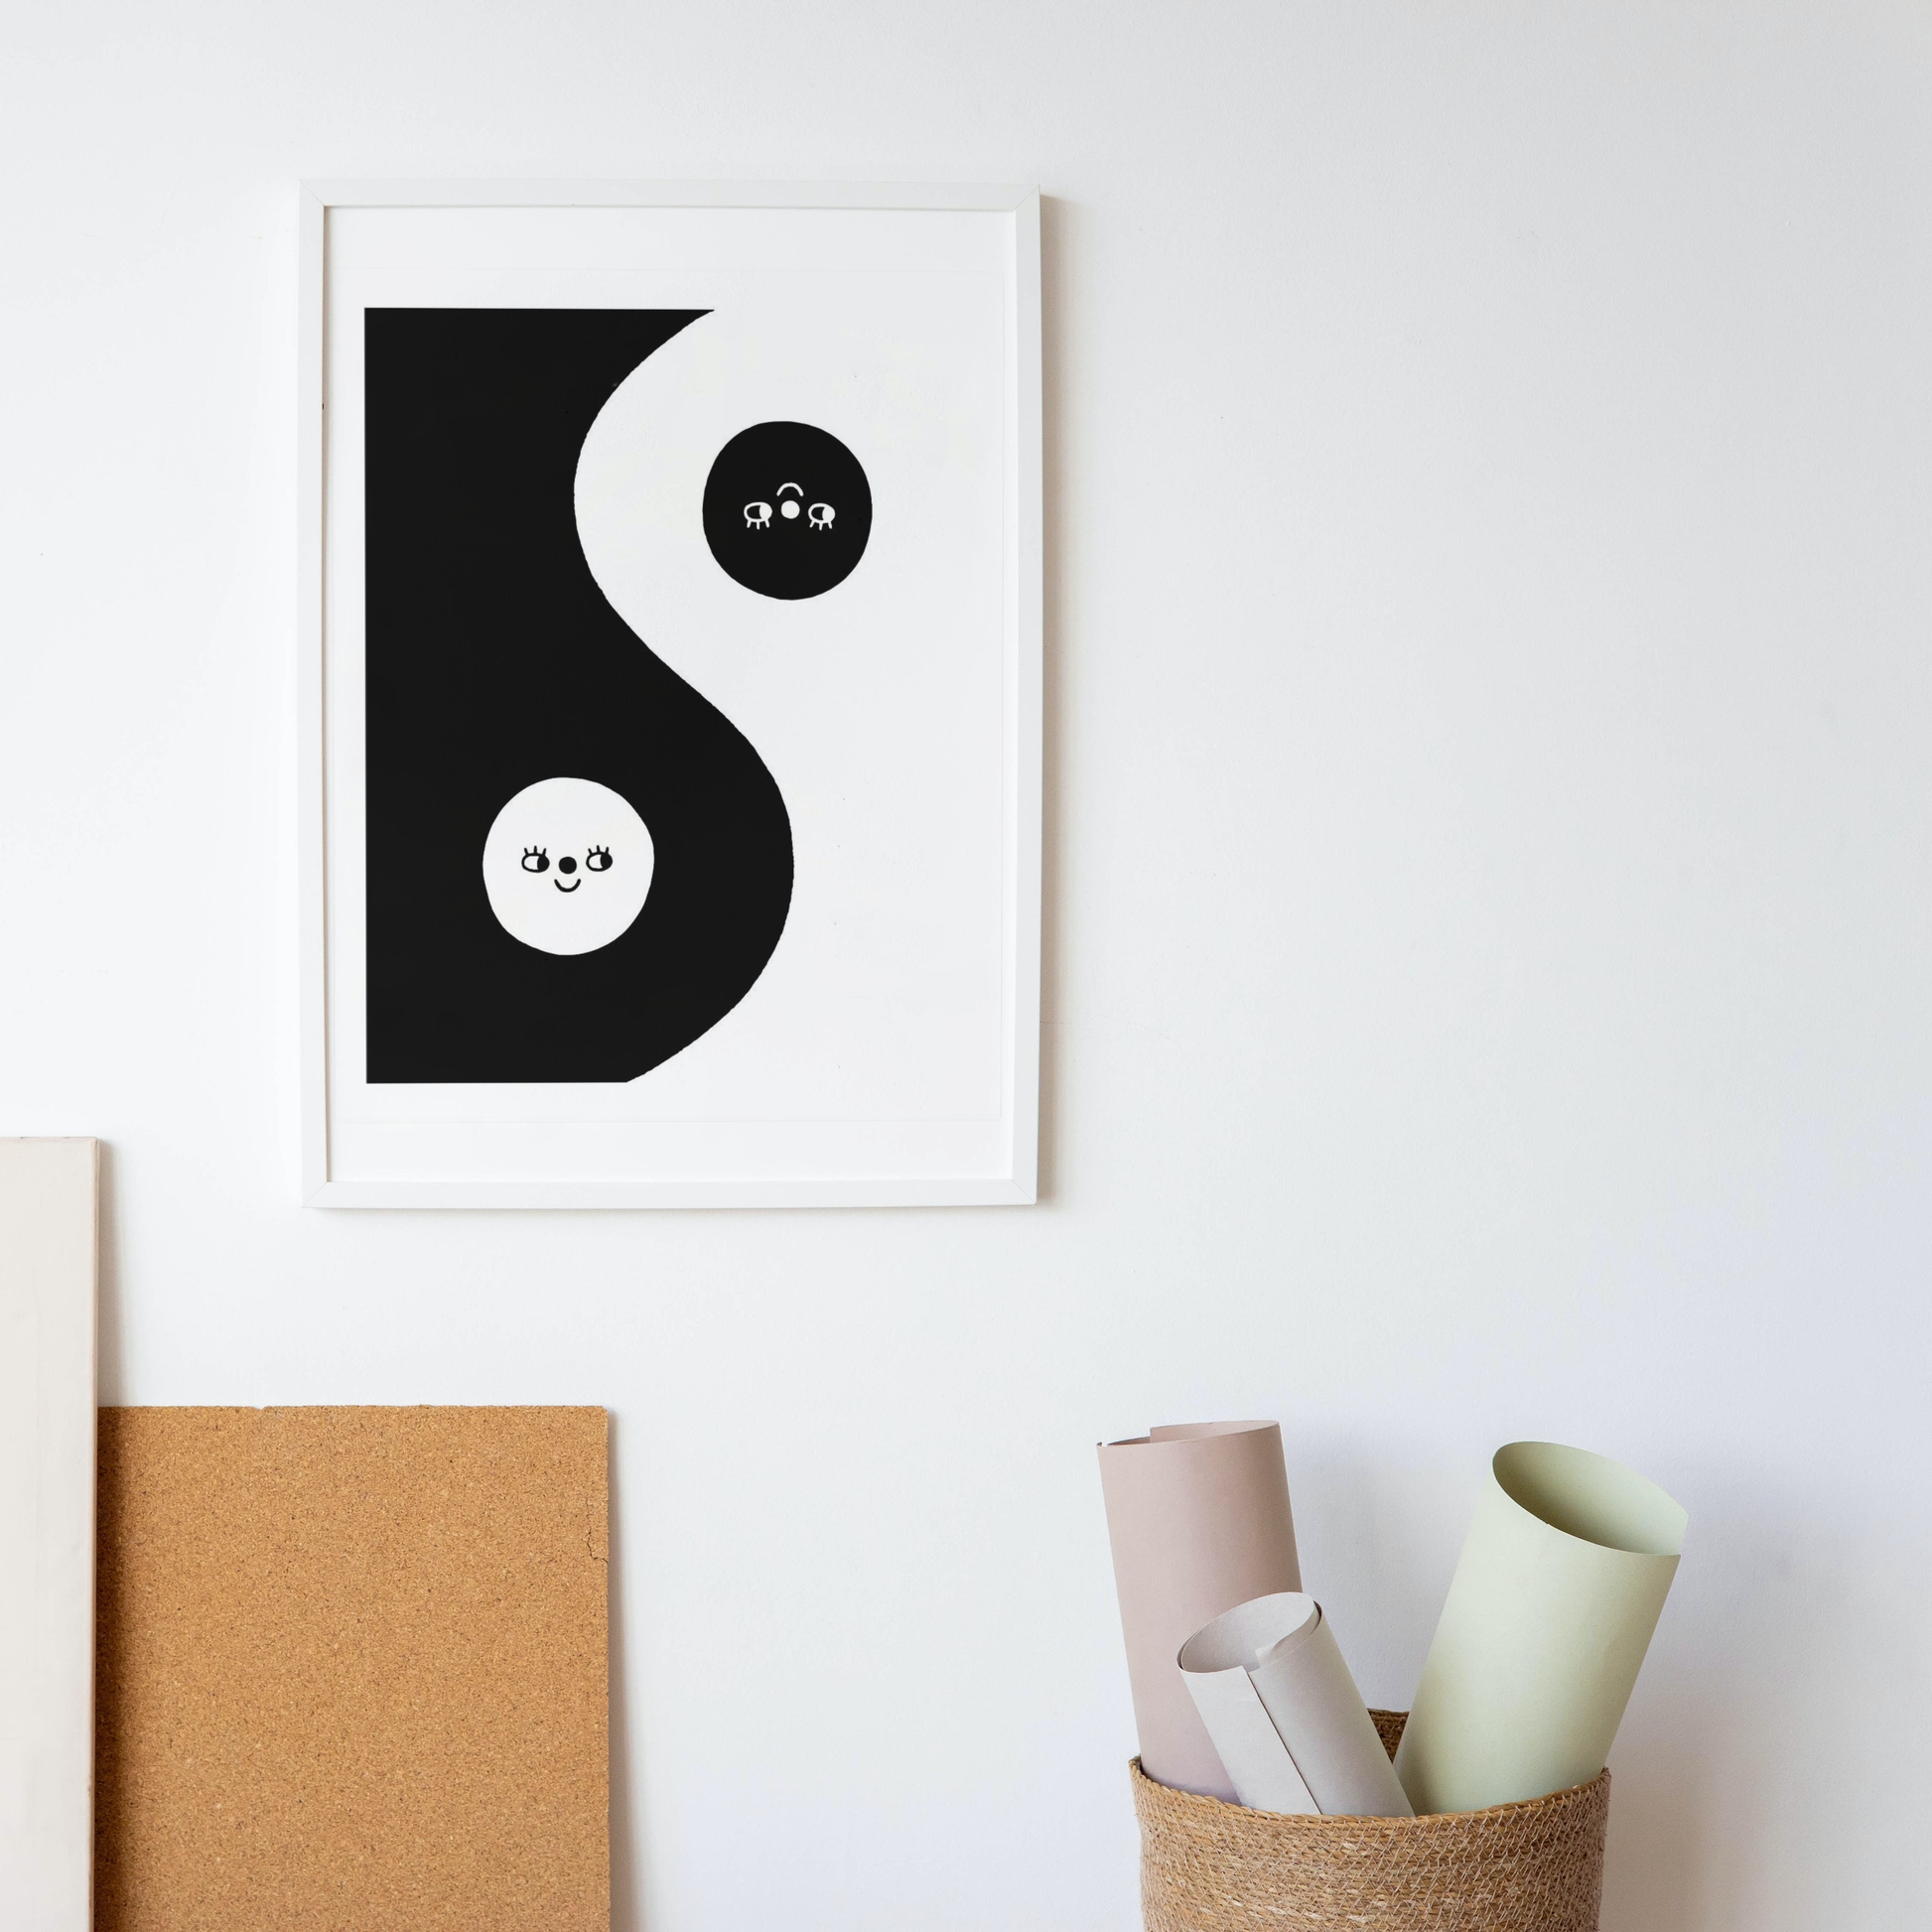 A framed illustrated risograph print of a yin yang symbol with faces, hangs on a white wall with art supplies on the floor below.